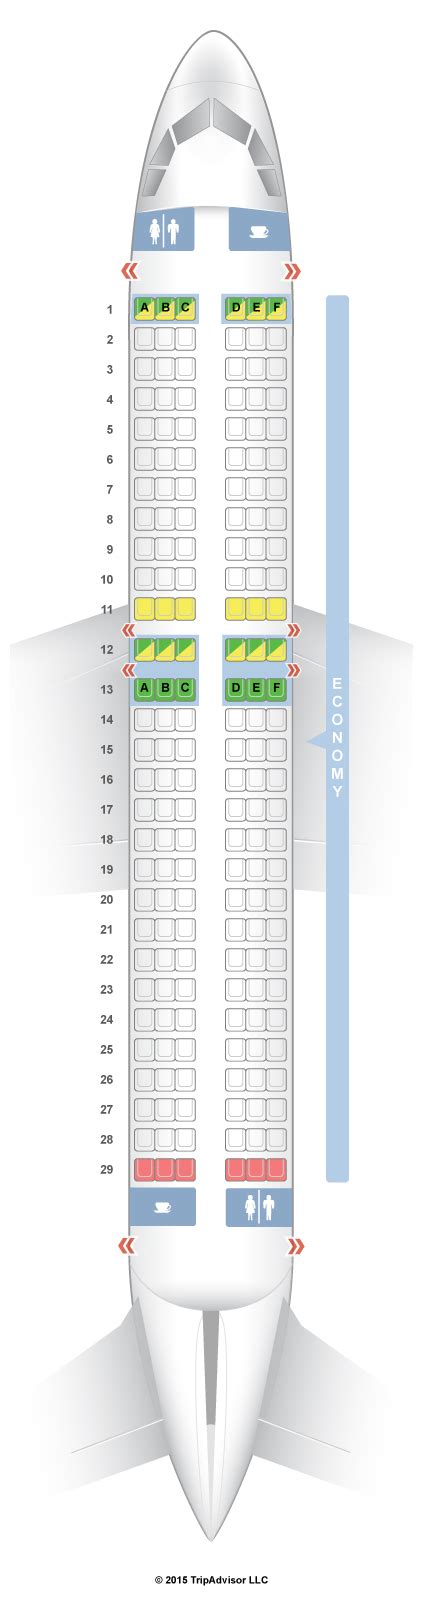 Alaska Airlines Airbus A Seat Map